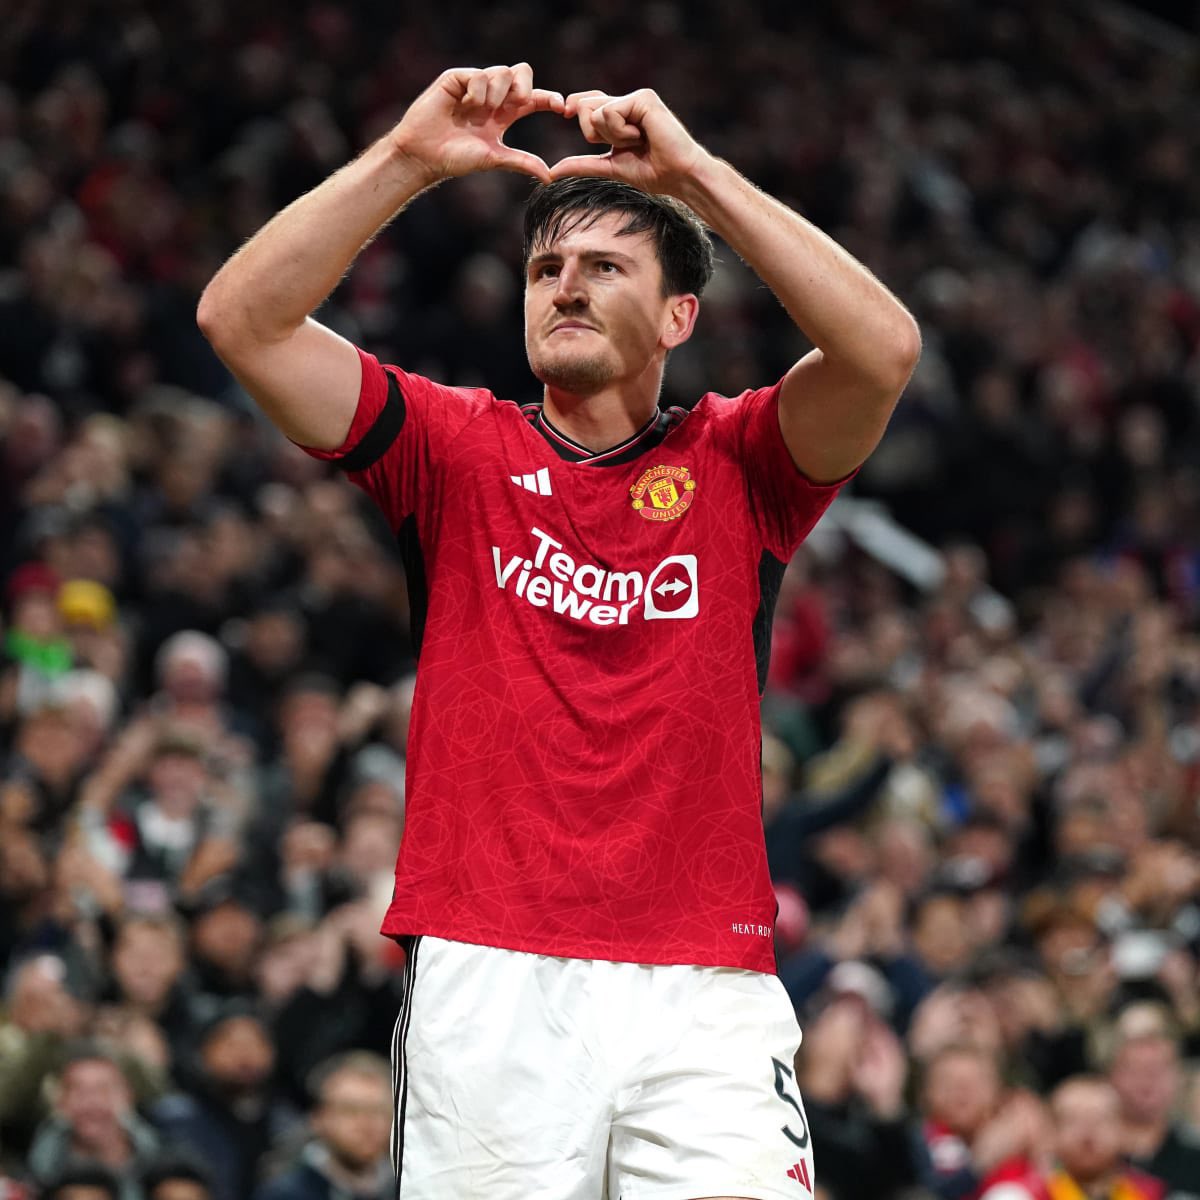 No noise or media outbursts after being dropped for months and almost being sold and then came back and became one of our most consistent players Ladies and Gentlemen Harry Maguire